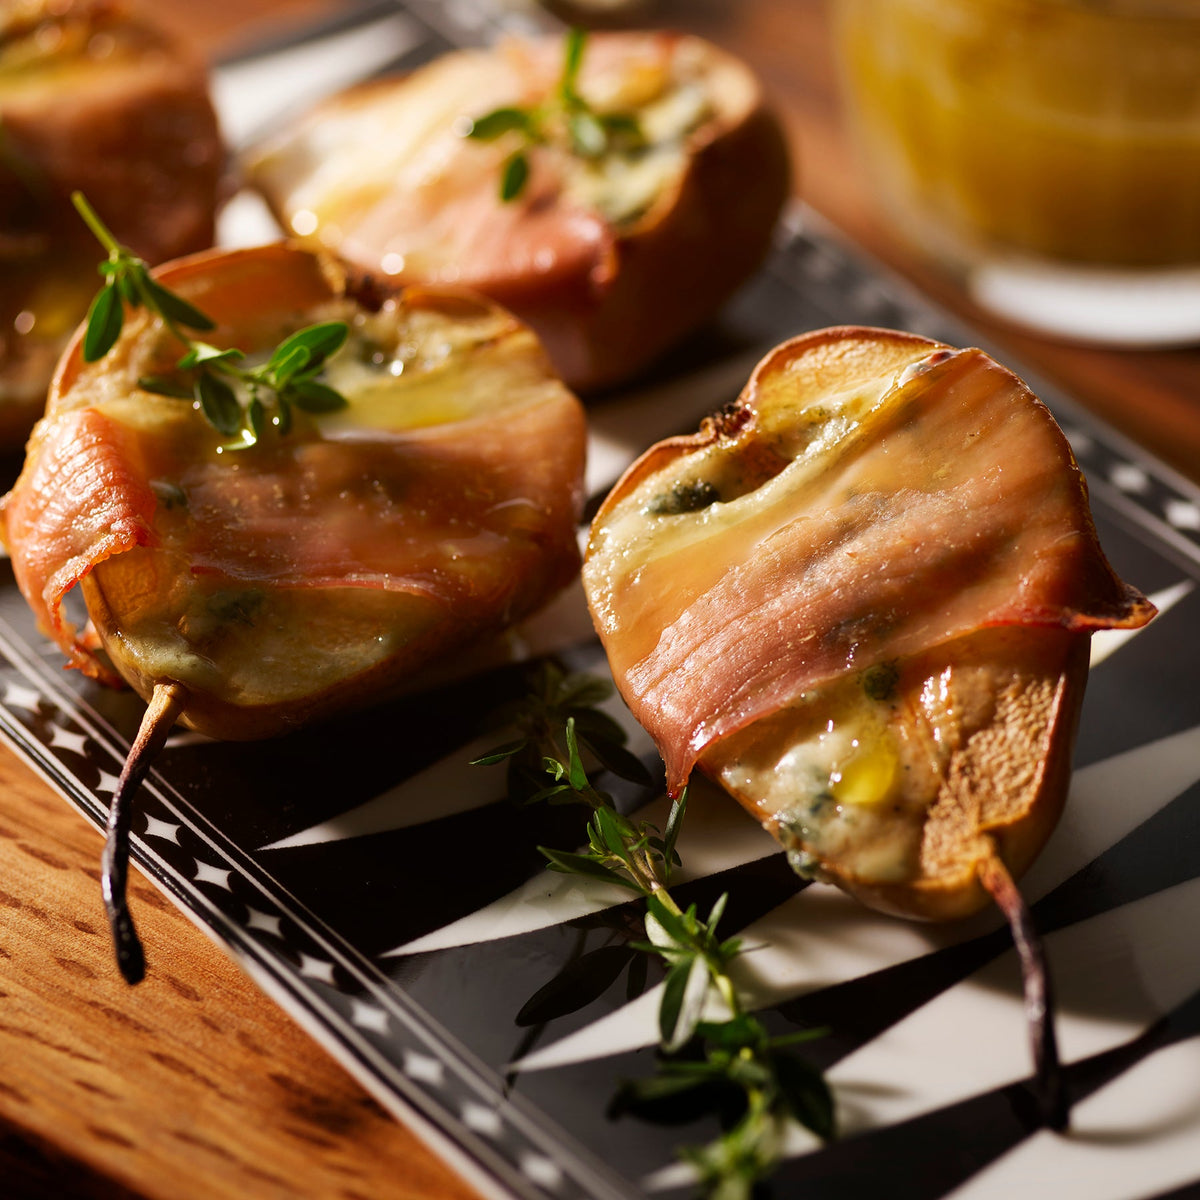 Slices of pears wrapped in bacon with melted cheese and herbs on an elegant Caskata Marrakech Medium Sushi Tray, Set of 2, resting on a wooden surface with a blurred glass jar in the background.